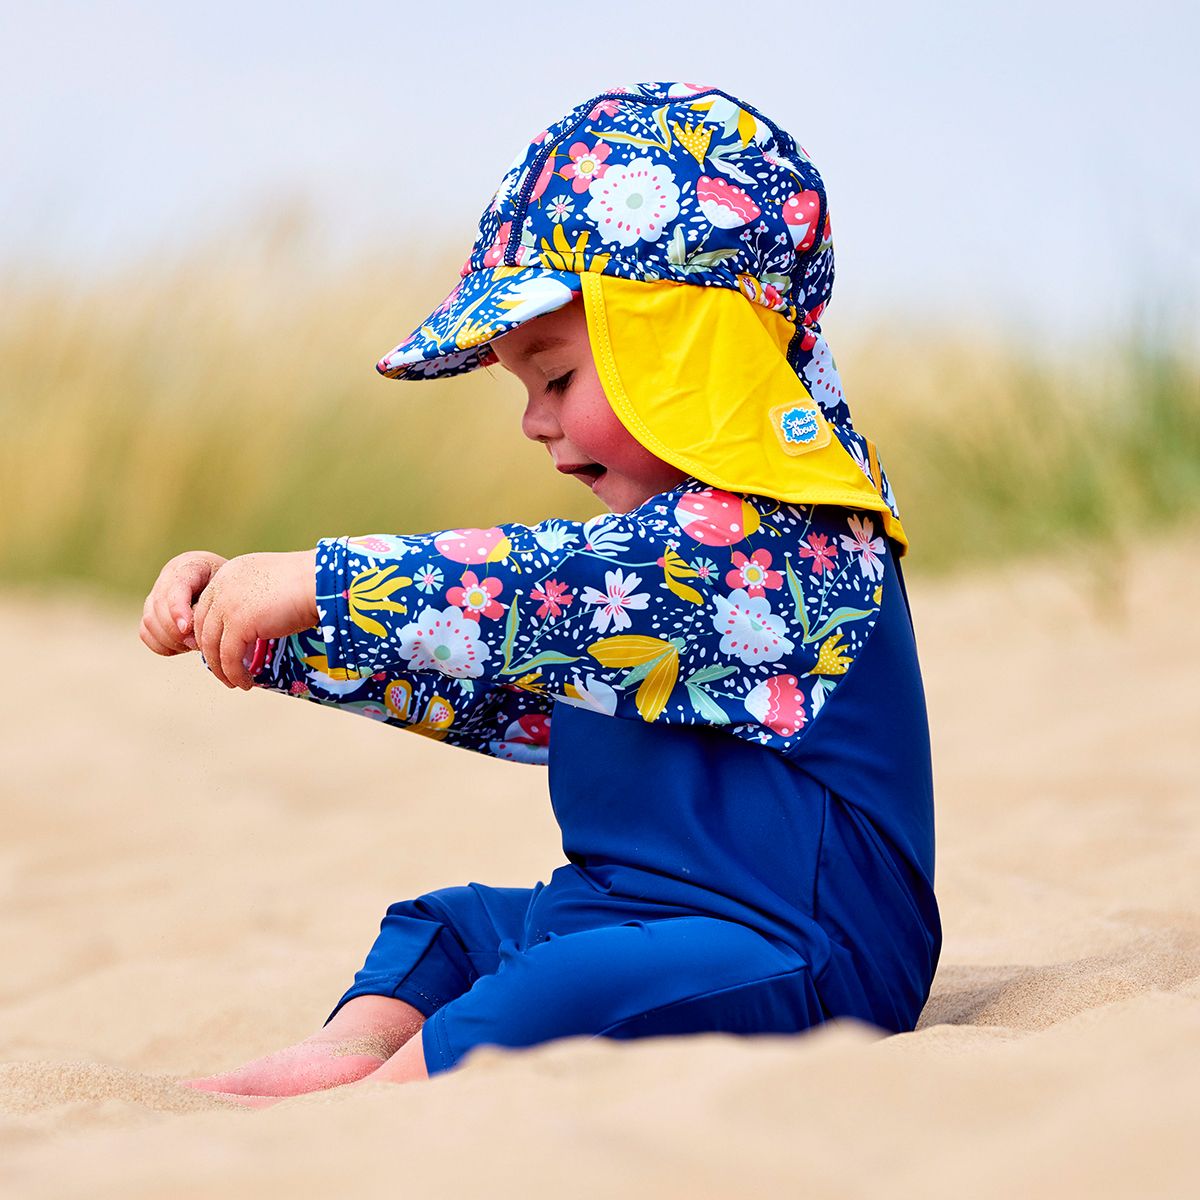 Lifestyle image of toddler wearing a legionnaire style sun hat in the beach. The hat is navy blue, with yellow trims and floral print panel . He's also wearing matching UV All in One sunsuit.